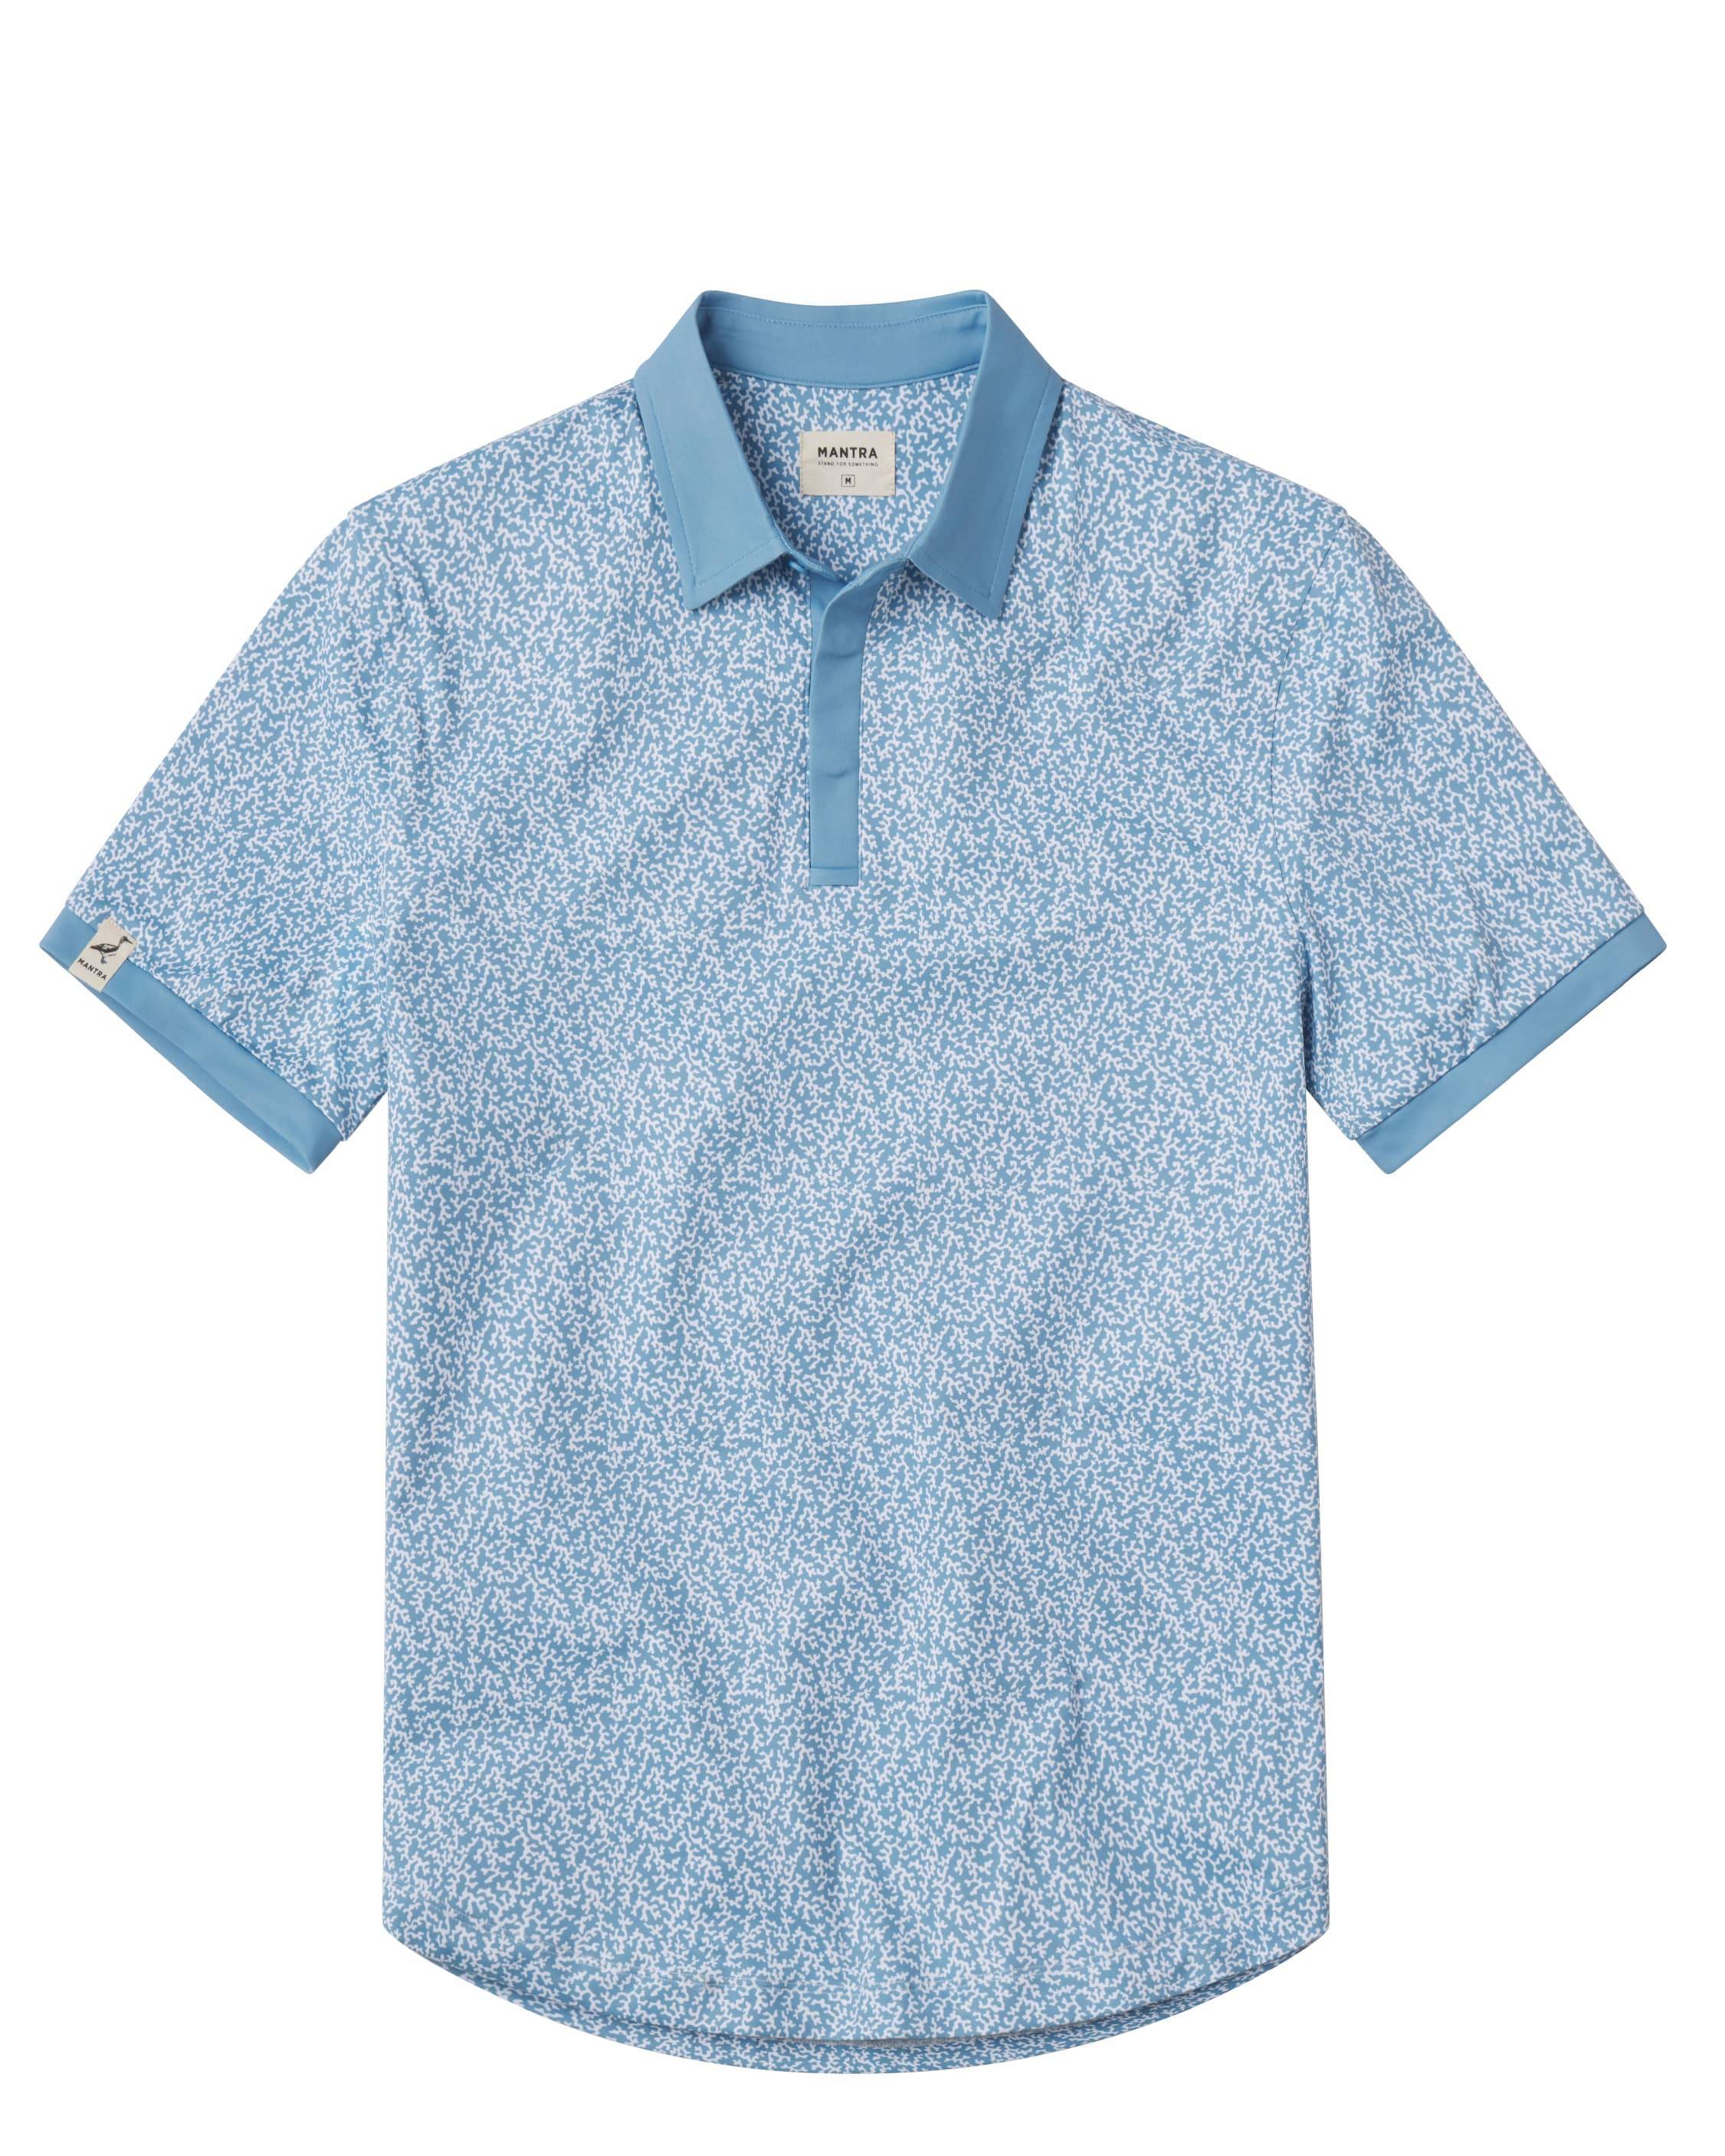 CATALYST POLO - POINT COLLAR - CORAL color selector